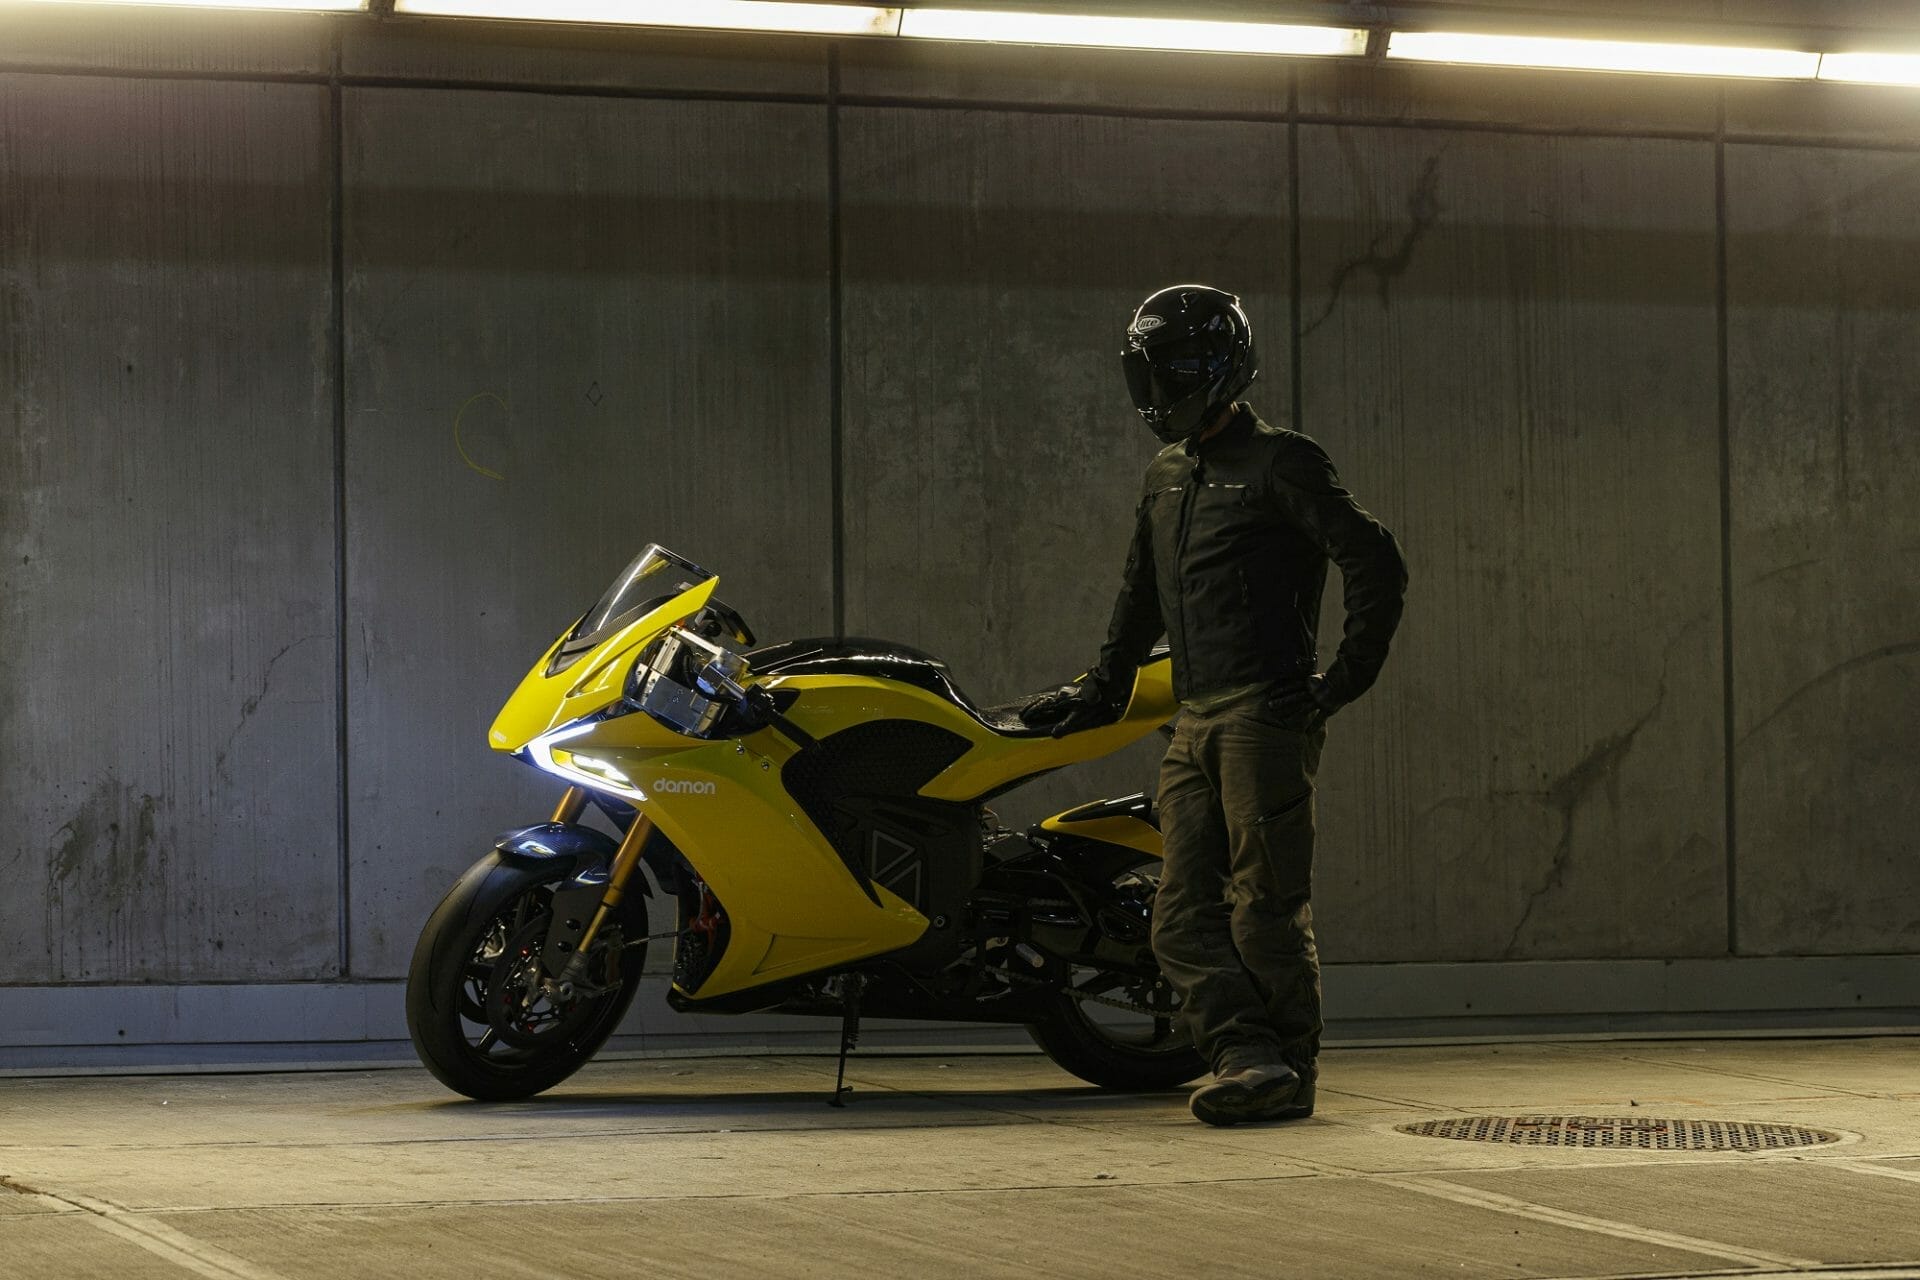 #Damon #HyperSport presented at CES
- also in the app Motorcycle News